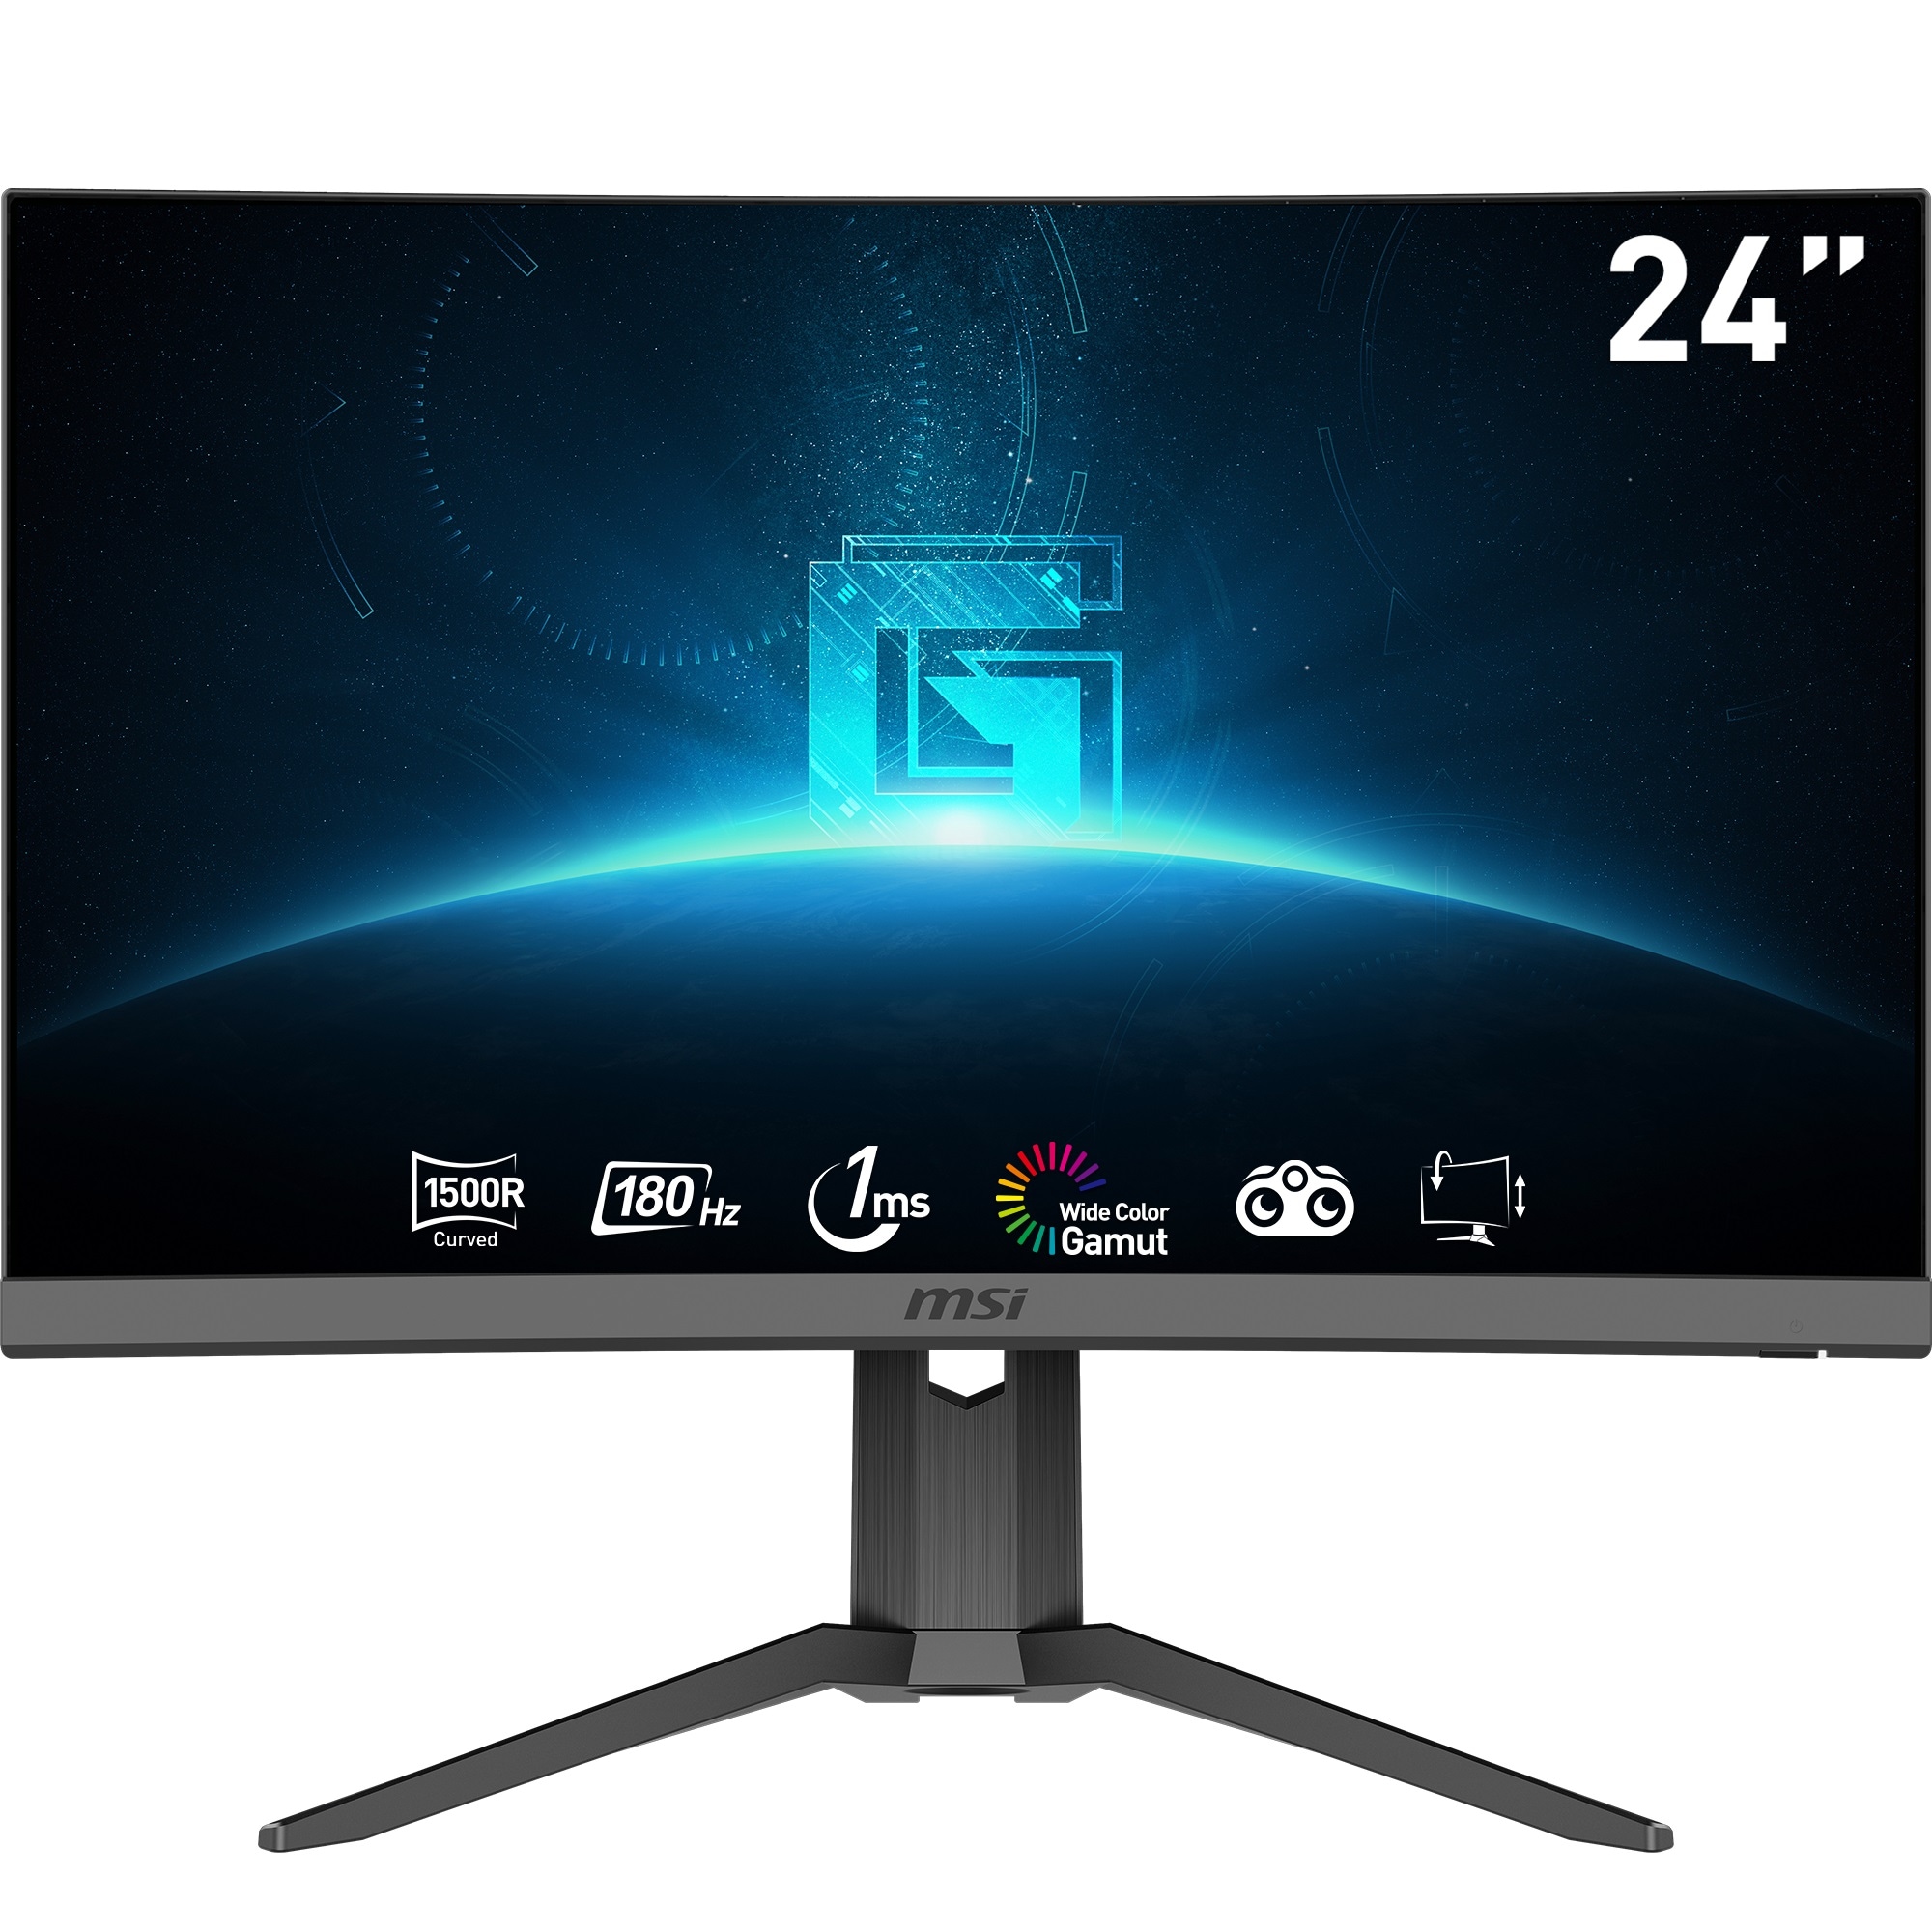 Curved-Gaming-LED-Monitor »G24C6P E2«, 59,9 cm/24 Zoll, 1920 x 1080 px, Full HD, 1 ms...